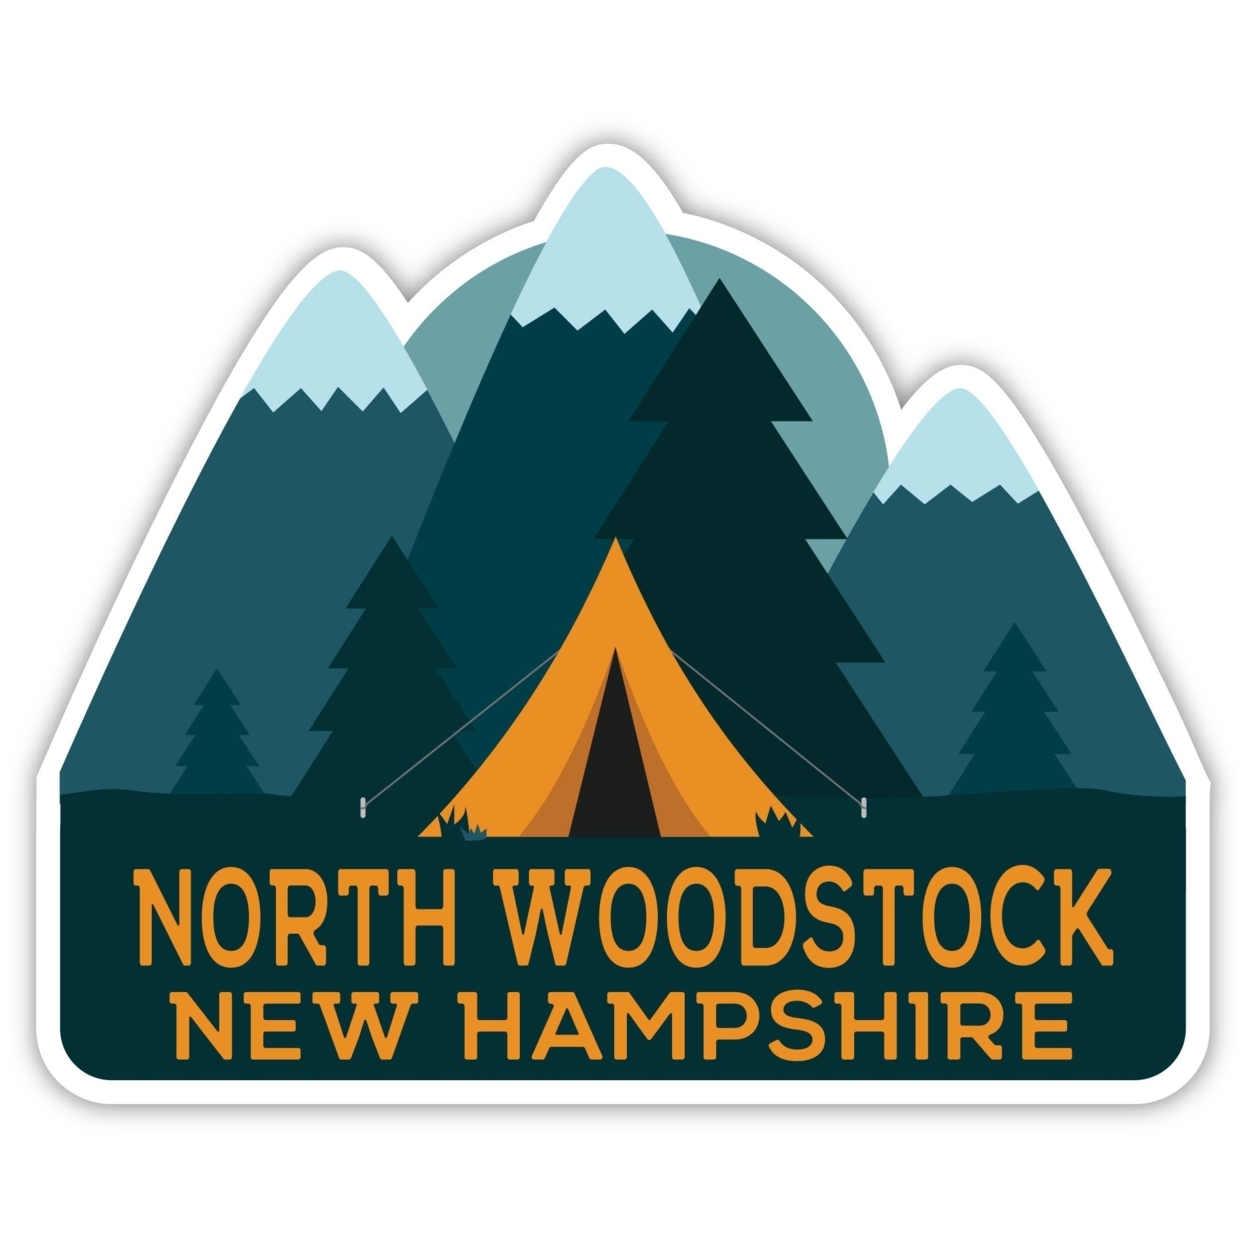 North Woodstock New Hampshire Souvenir Decorative Stickers (Choose Theme And Size) - Single Unit, 2-Inch, Tent